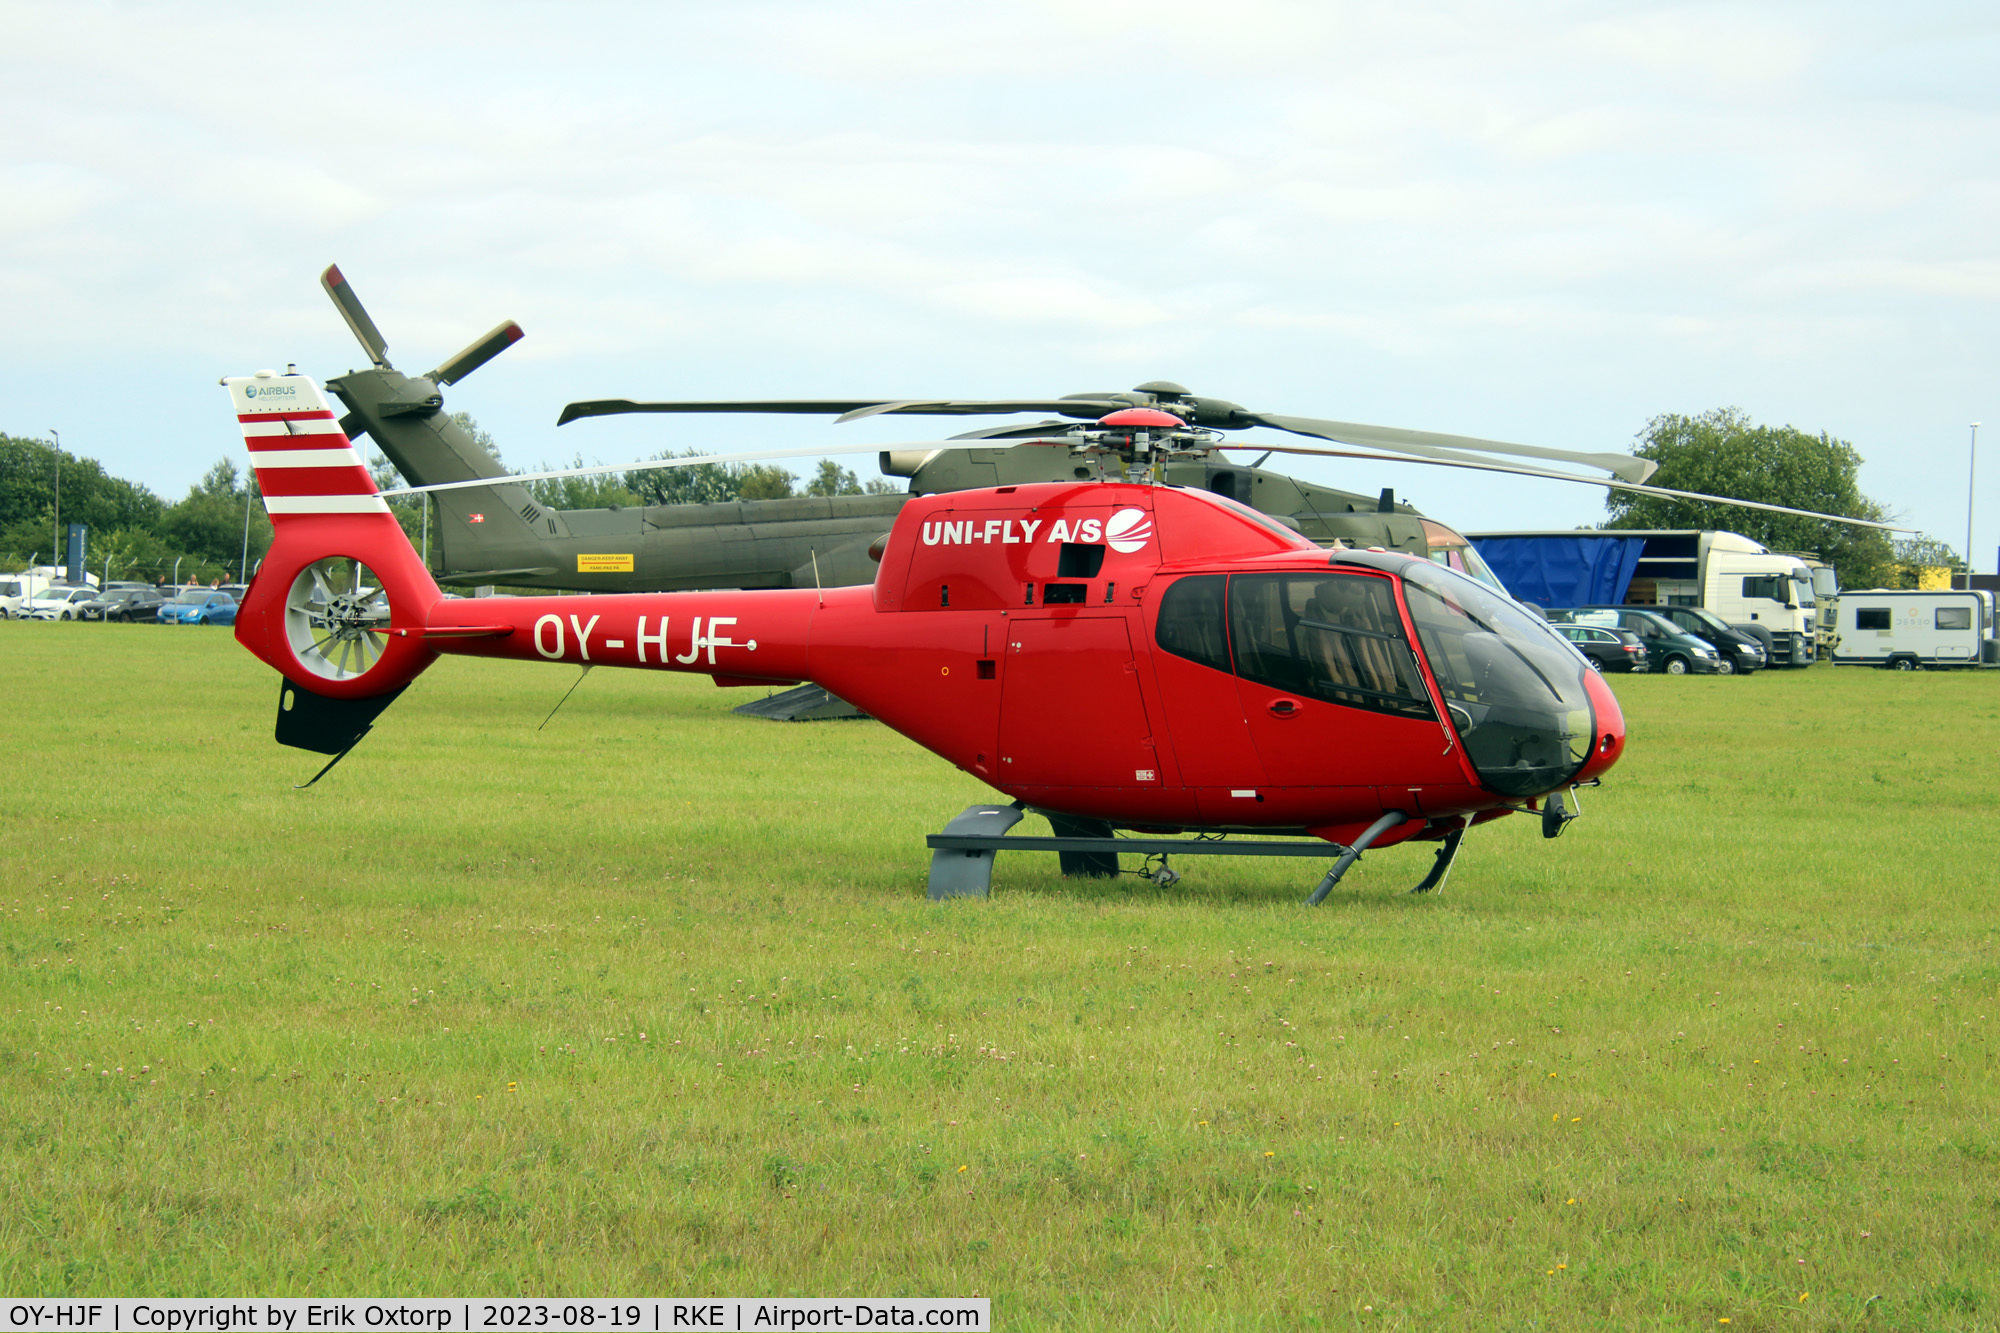 OY-HJF, 2007 Eurocopter EC-120B Colibri C/N 1503, OY-HJF at the Roskilde Airshow